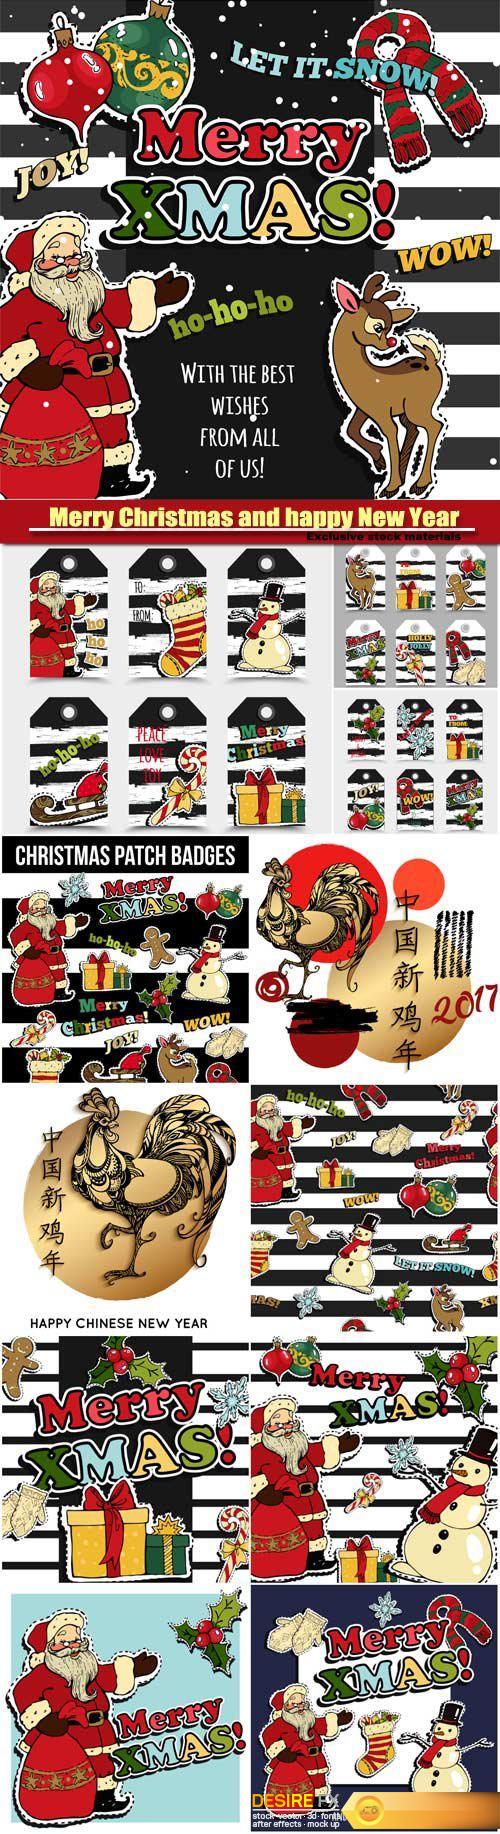 Merry Christmas and happy New Year greeting card design with retro patch badges, stickers